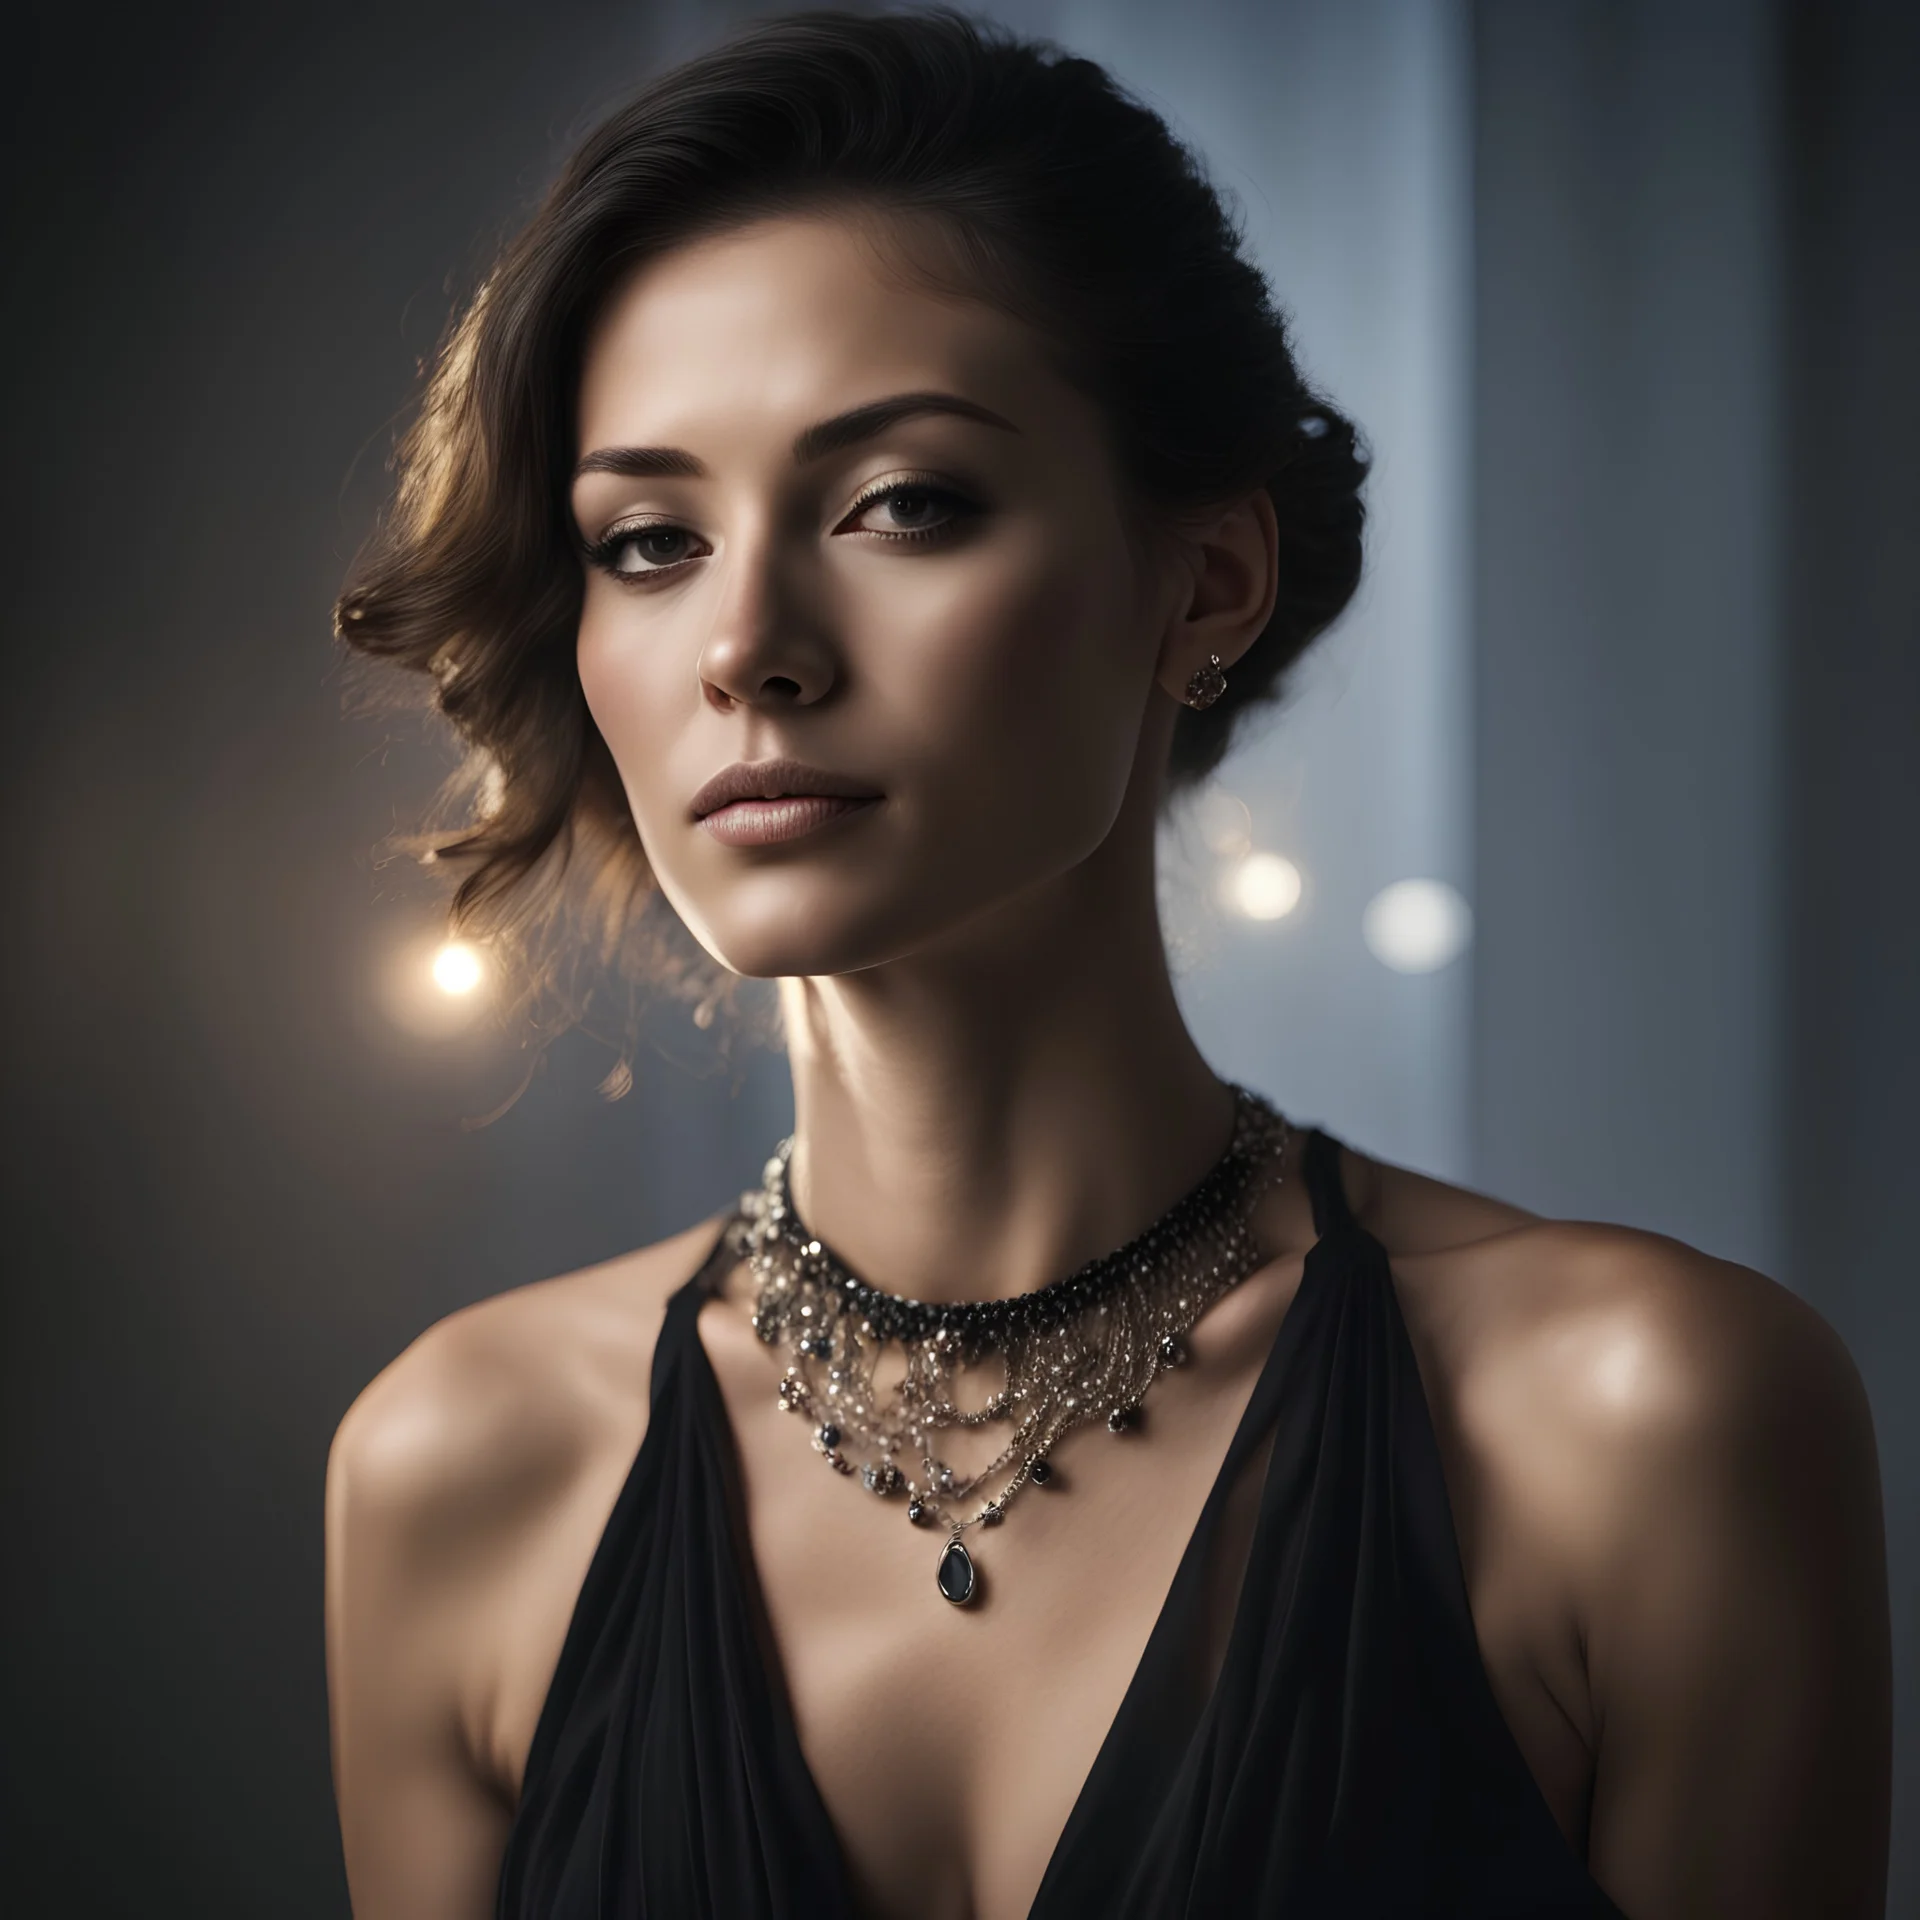 a portrait of a beautiful woman, wearing a black dress with a necklace around the neck, side shot with a play of lights and shadows, high definition,